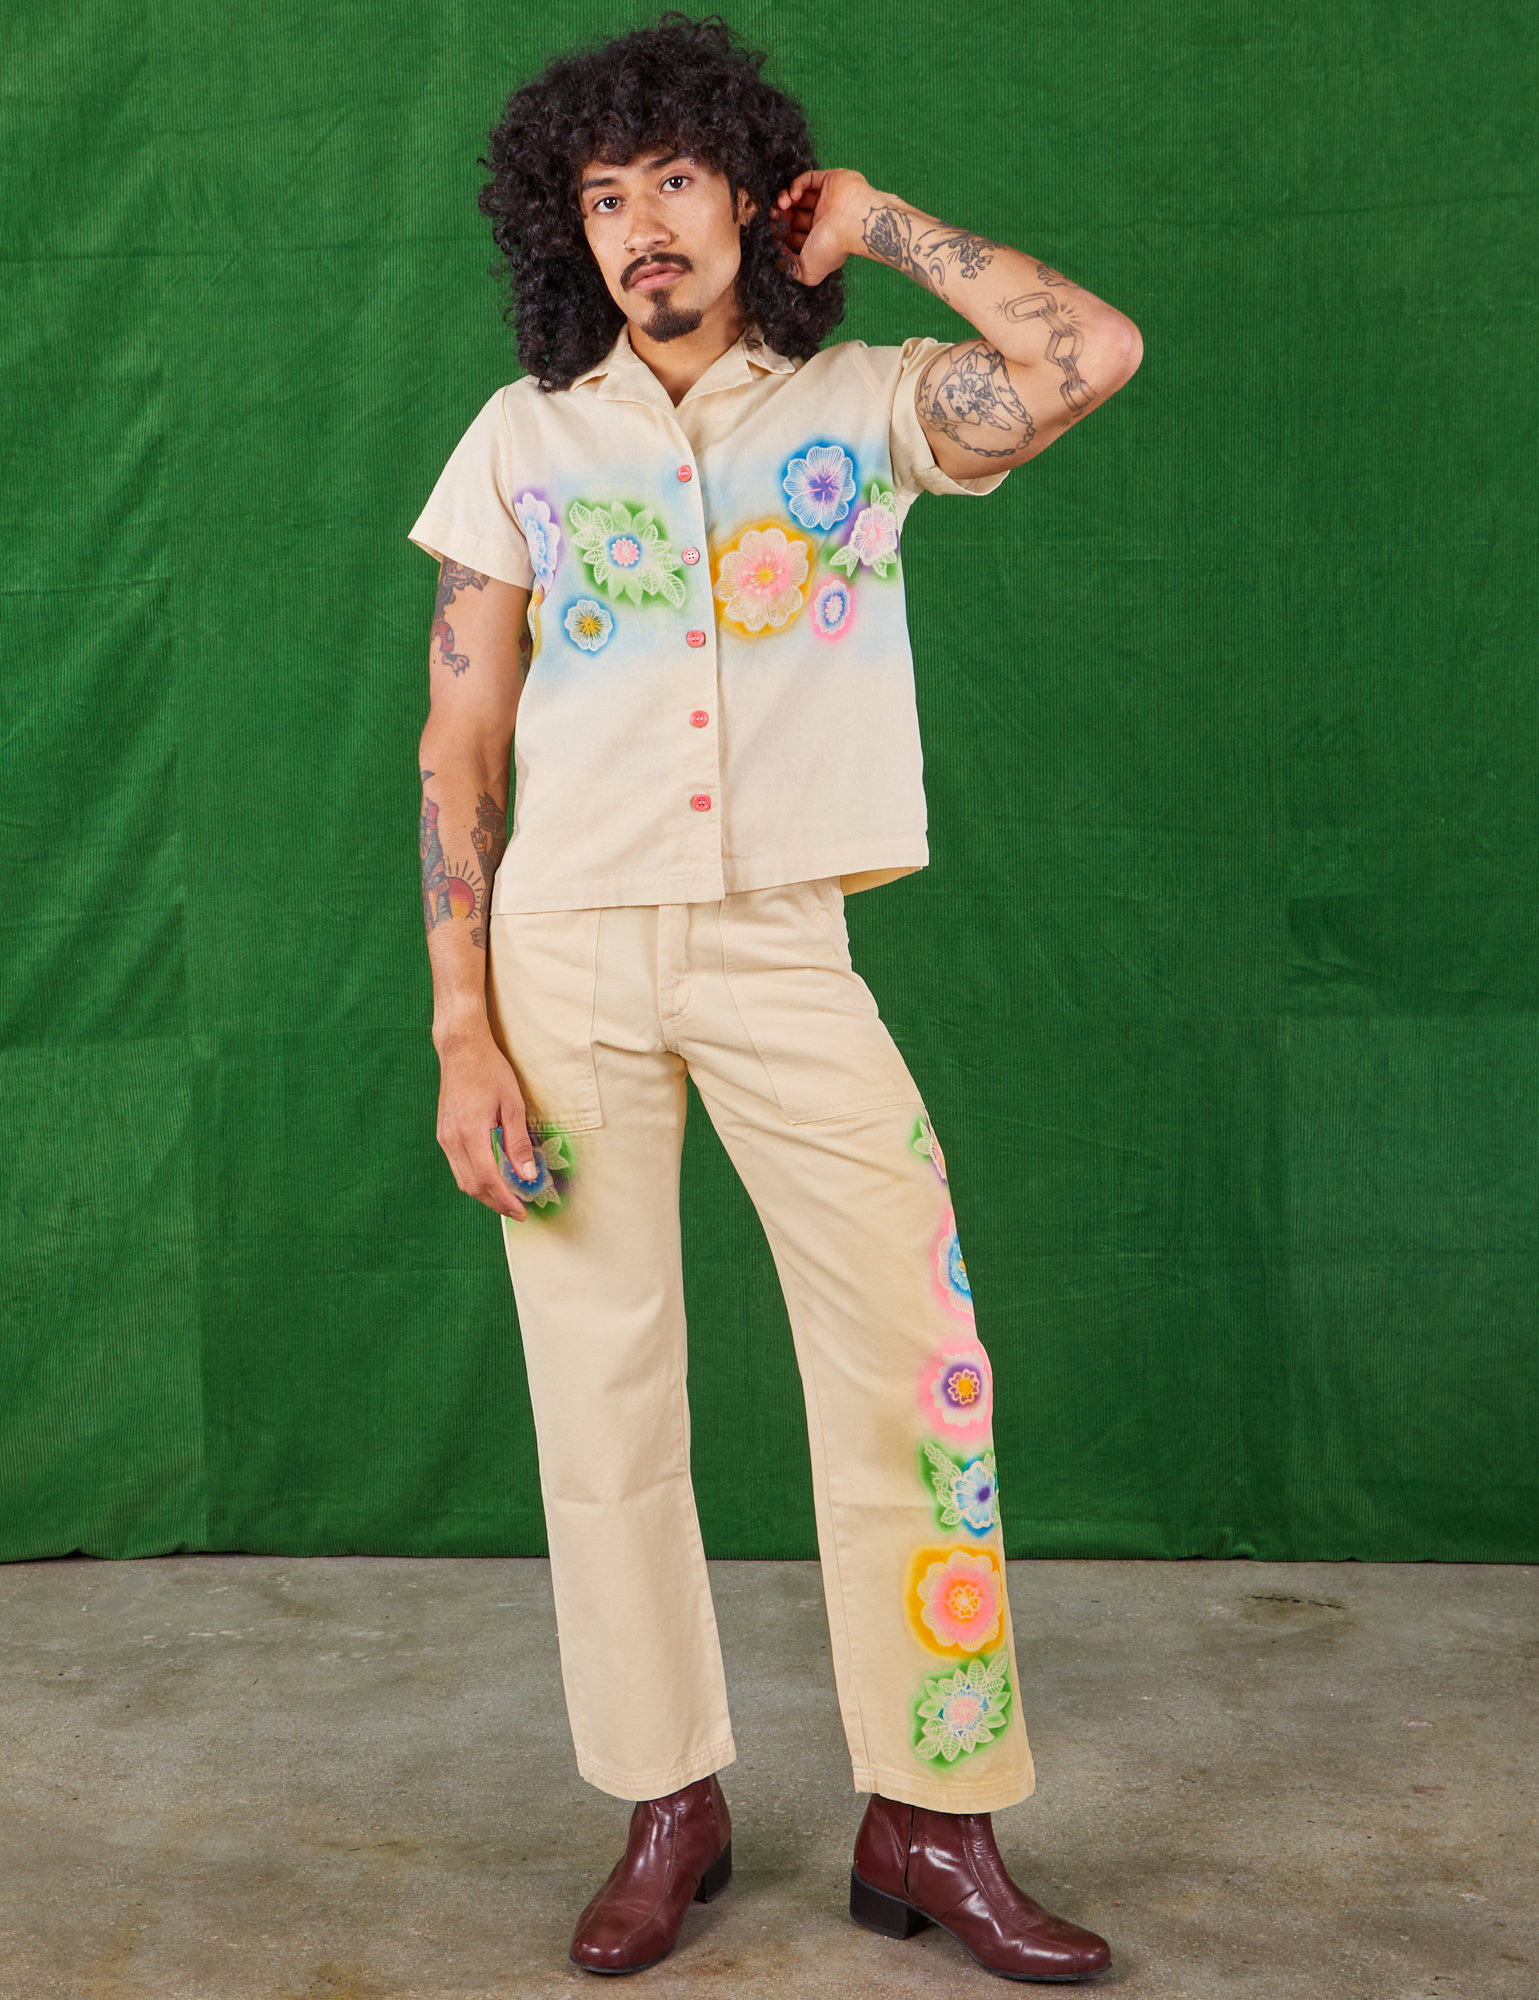 Jesse is wearing Pantry Button-Up in Lace Airbrush and matching Work Pants